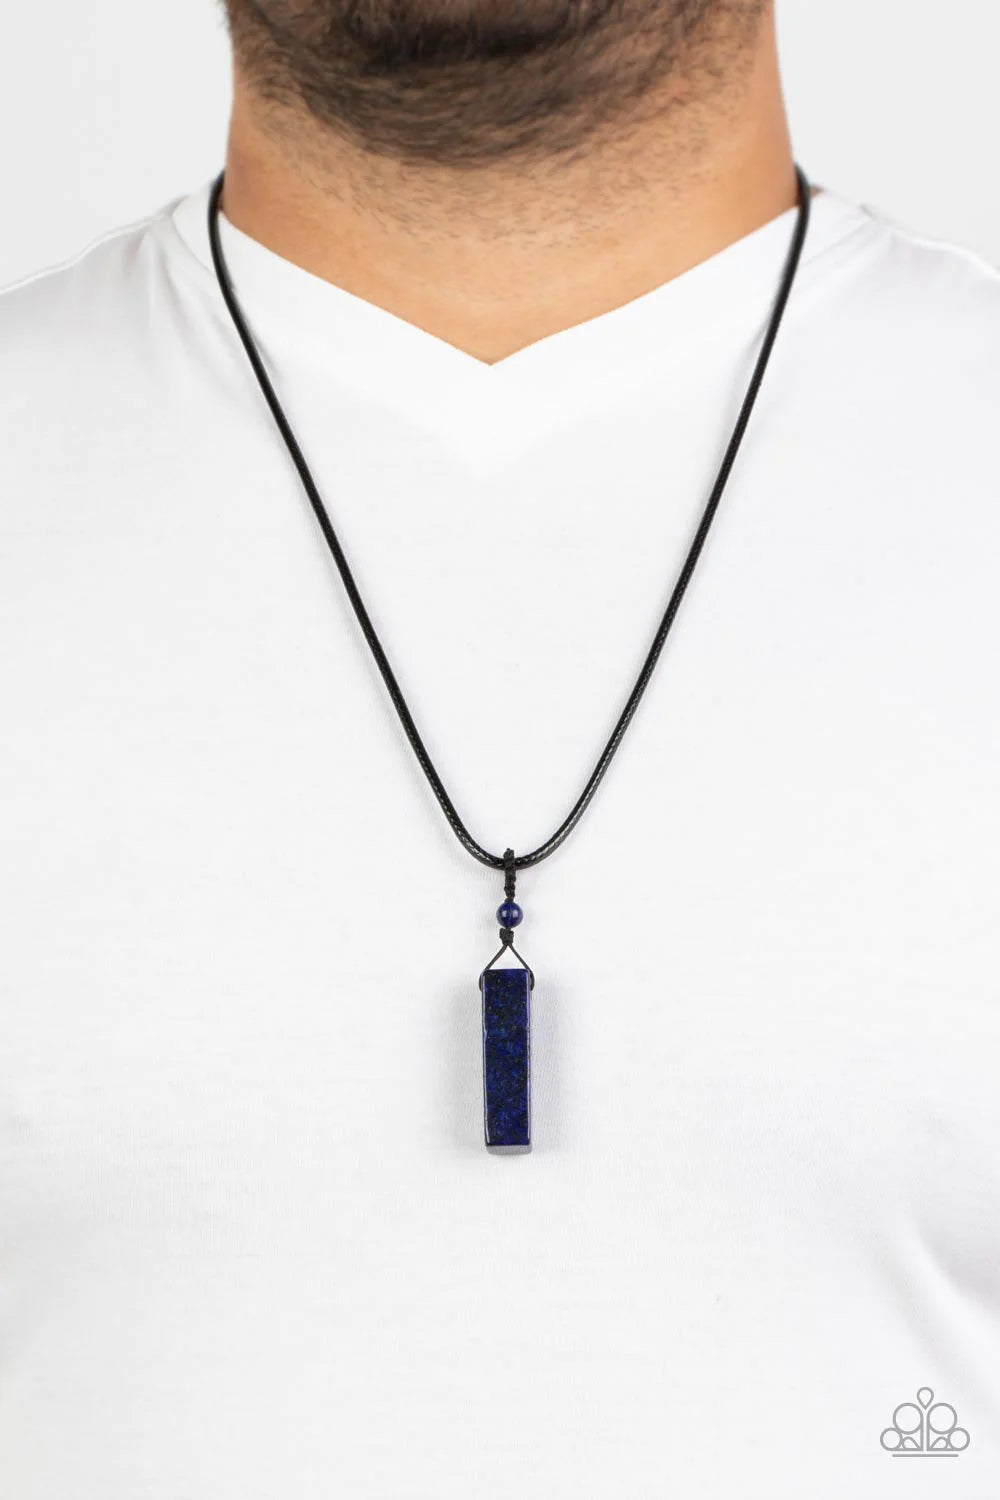 Paparazzi Accessories Comes Back ZEN-fold - Blue A rectangular lapis lazuli stone pendulum is knotted in place below a dainty lapis lazuli stone bead that glides along a shiny black cord below the collar, resulting in an earthy pendant. Features an adjust